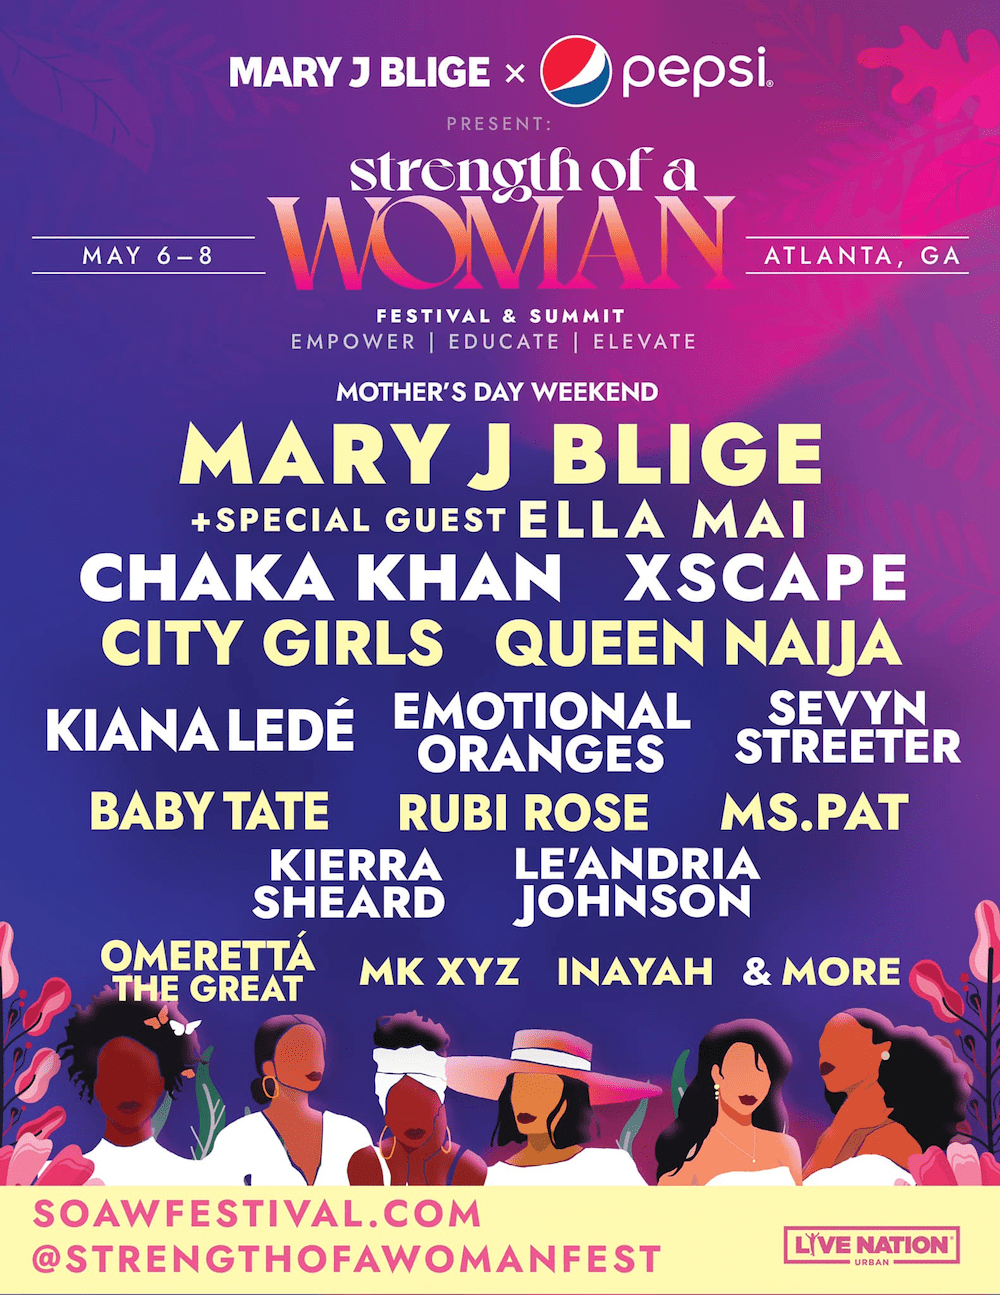 Strength Of A Woman Festival & Summit 2022 Inaugural Lineup Announced